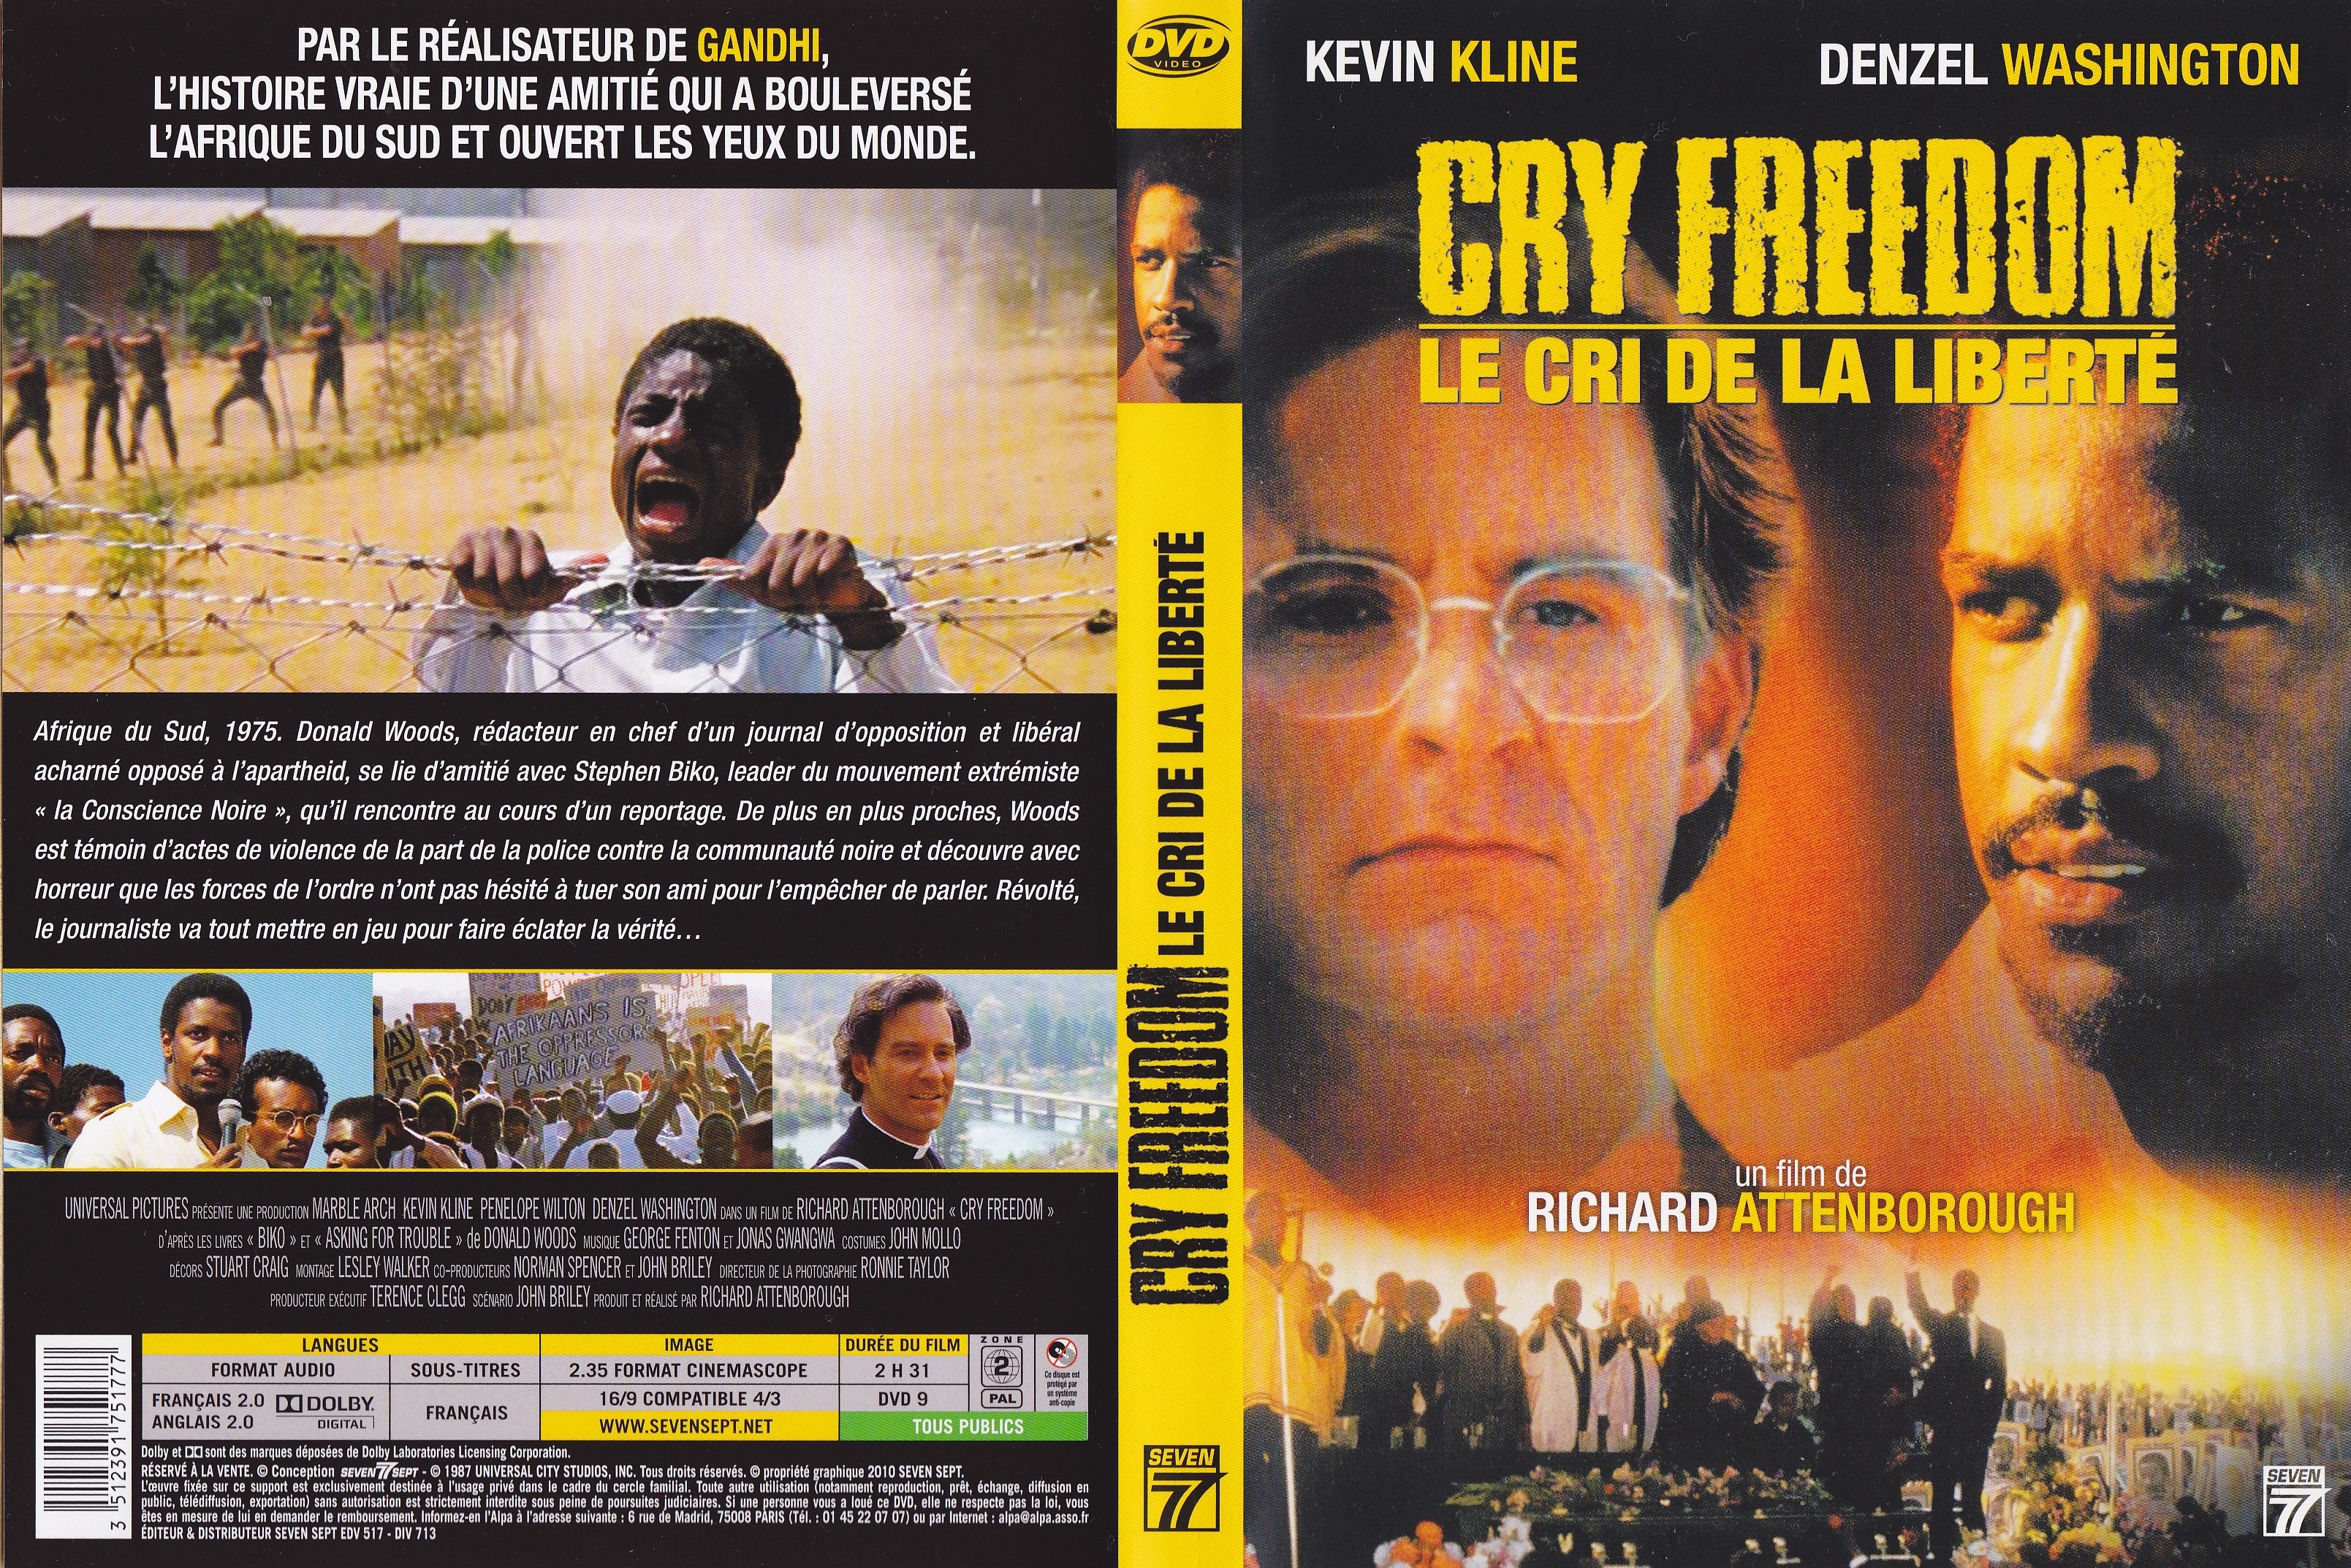 Jaquette DVD Cry Freedom v2